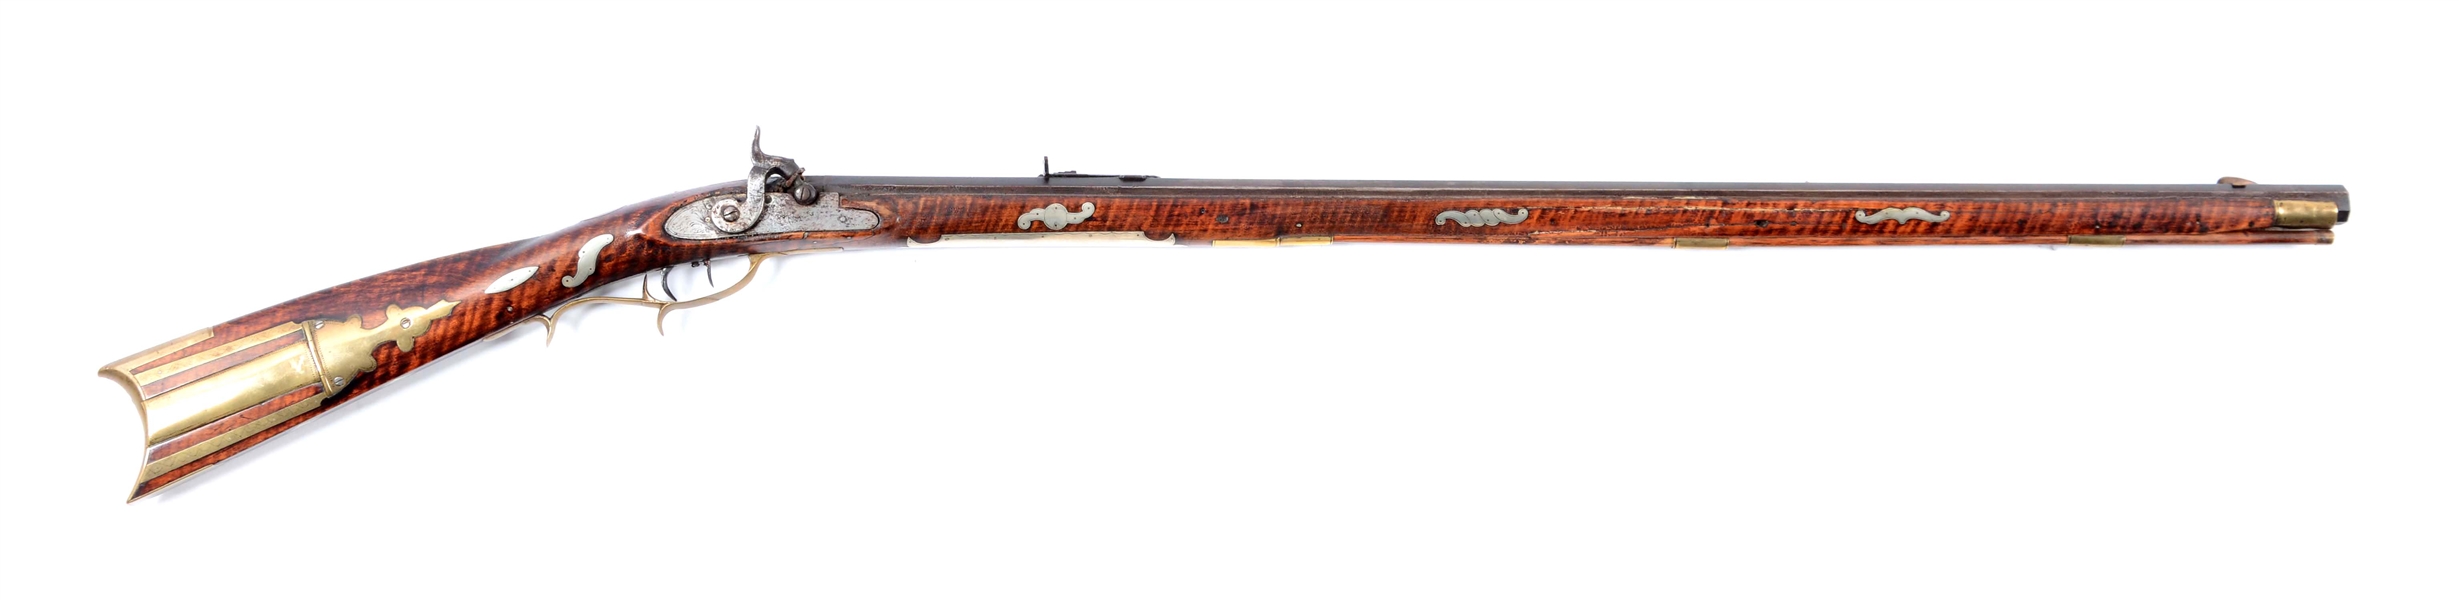 (A) FINE SILVER-INLAID FULL-STOCK KENTUCKY RIFLE BY JOSEPH SHAFER